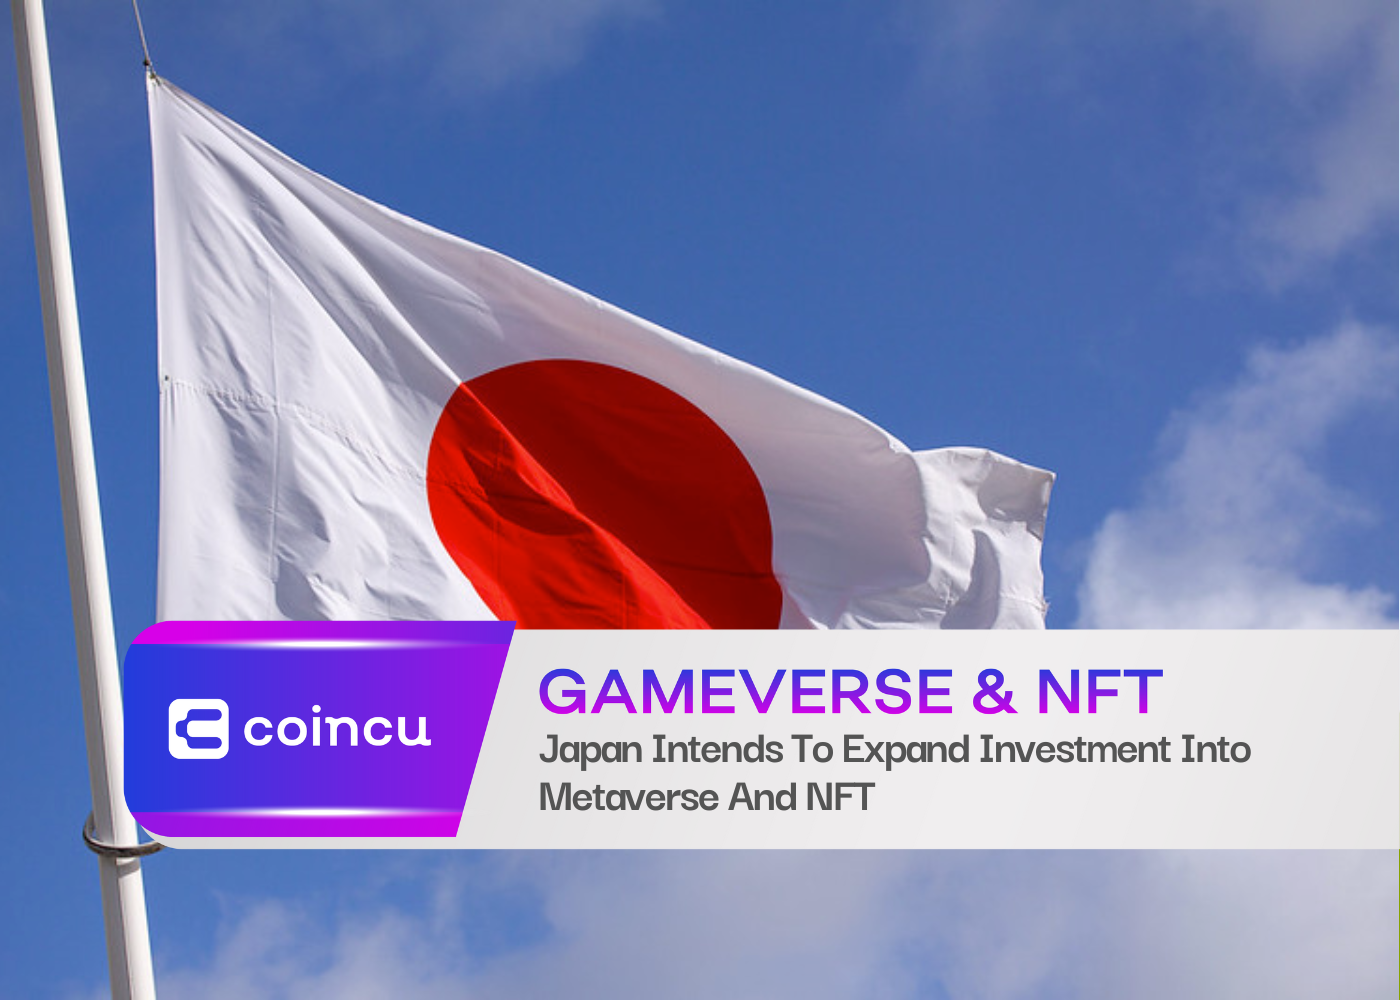 Japan Intends To Expand Investment Into Metaverse And NFT